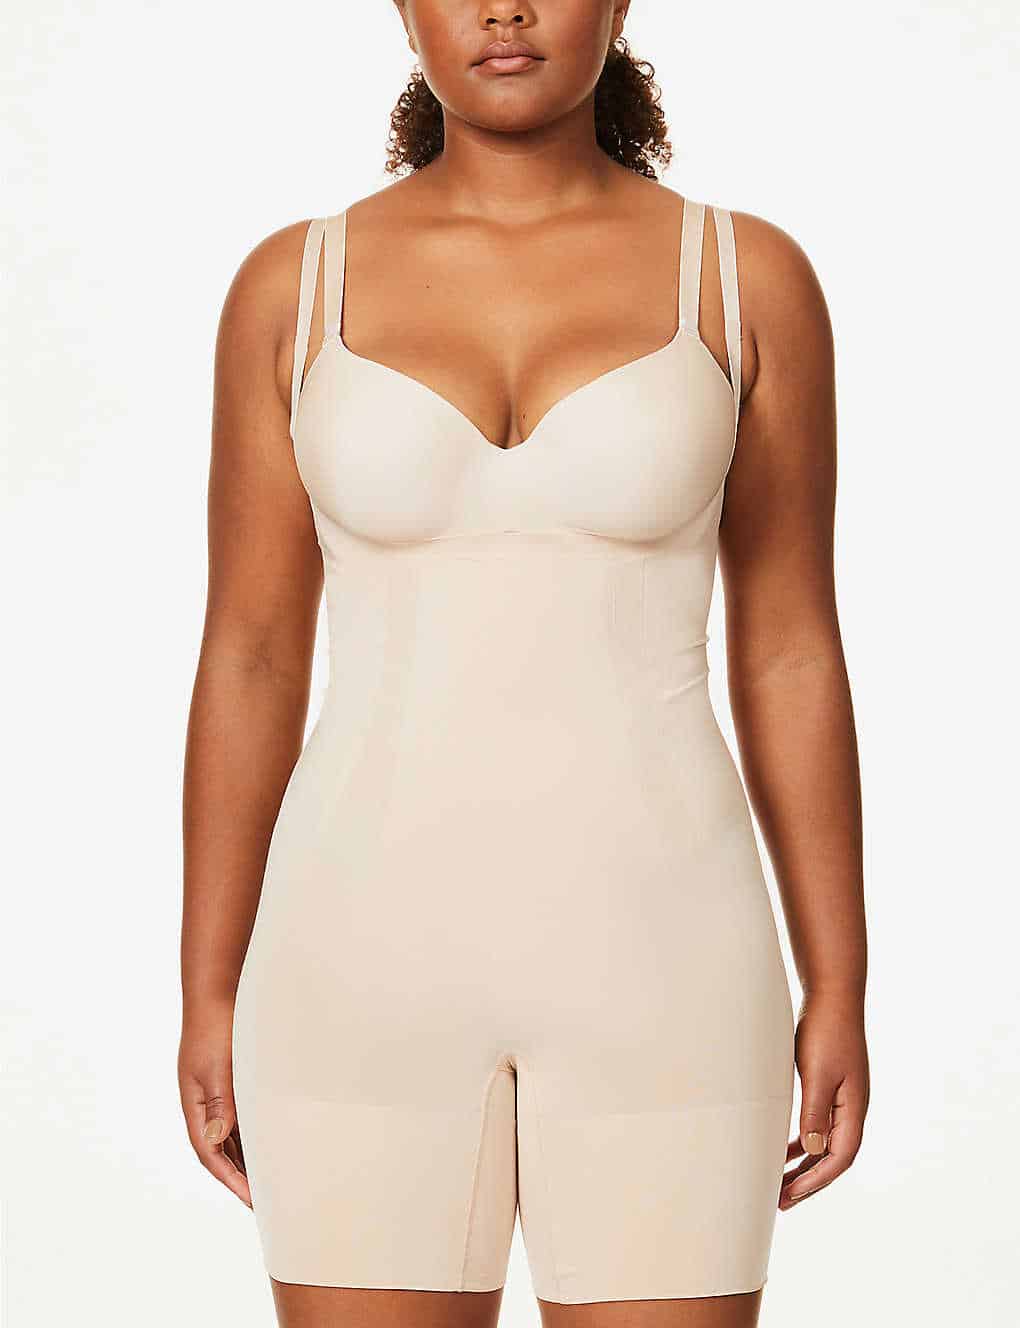 spanx body suit to look thinner